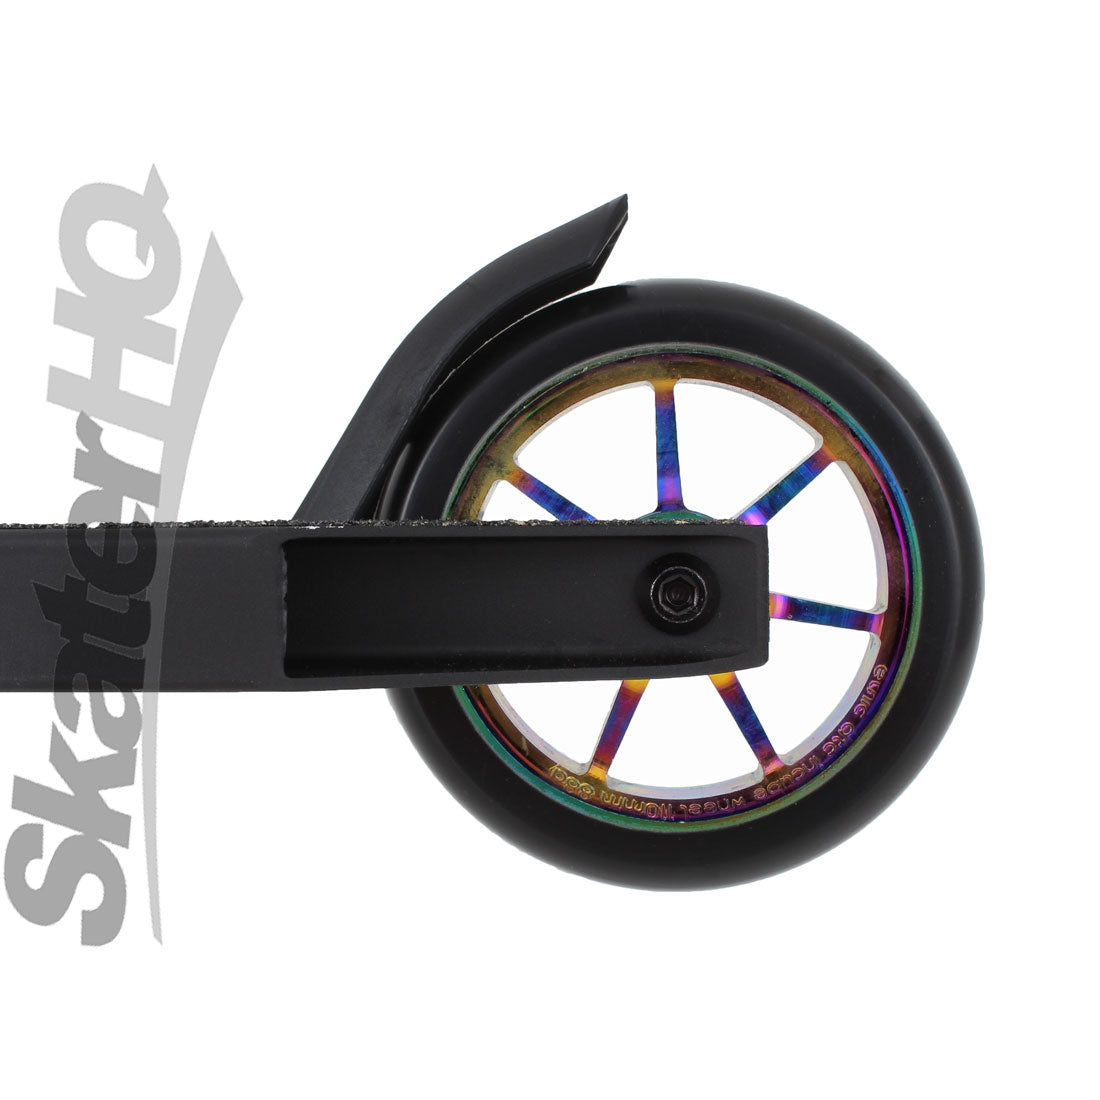 Ethic Erawan Complete - Black/Neochrome Scooter Completes Trick